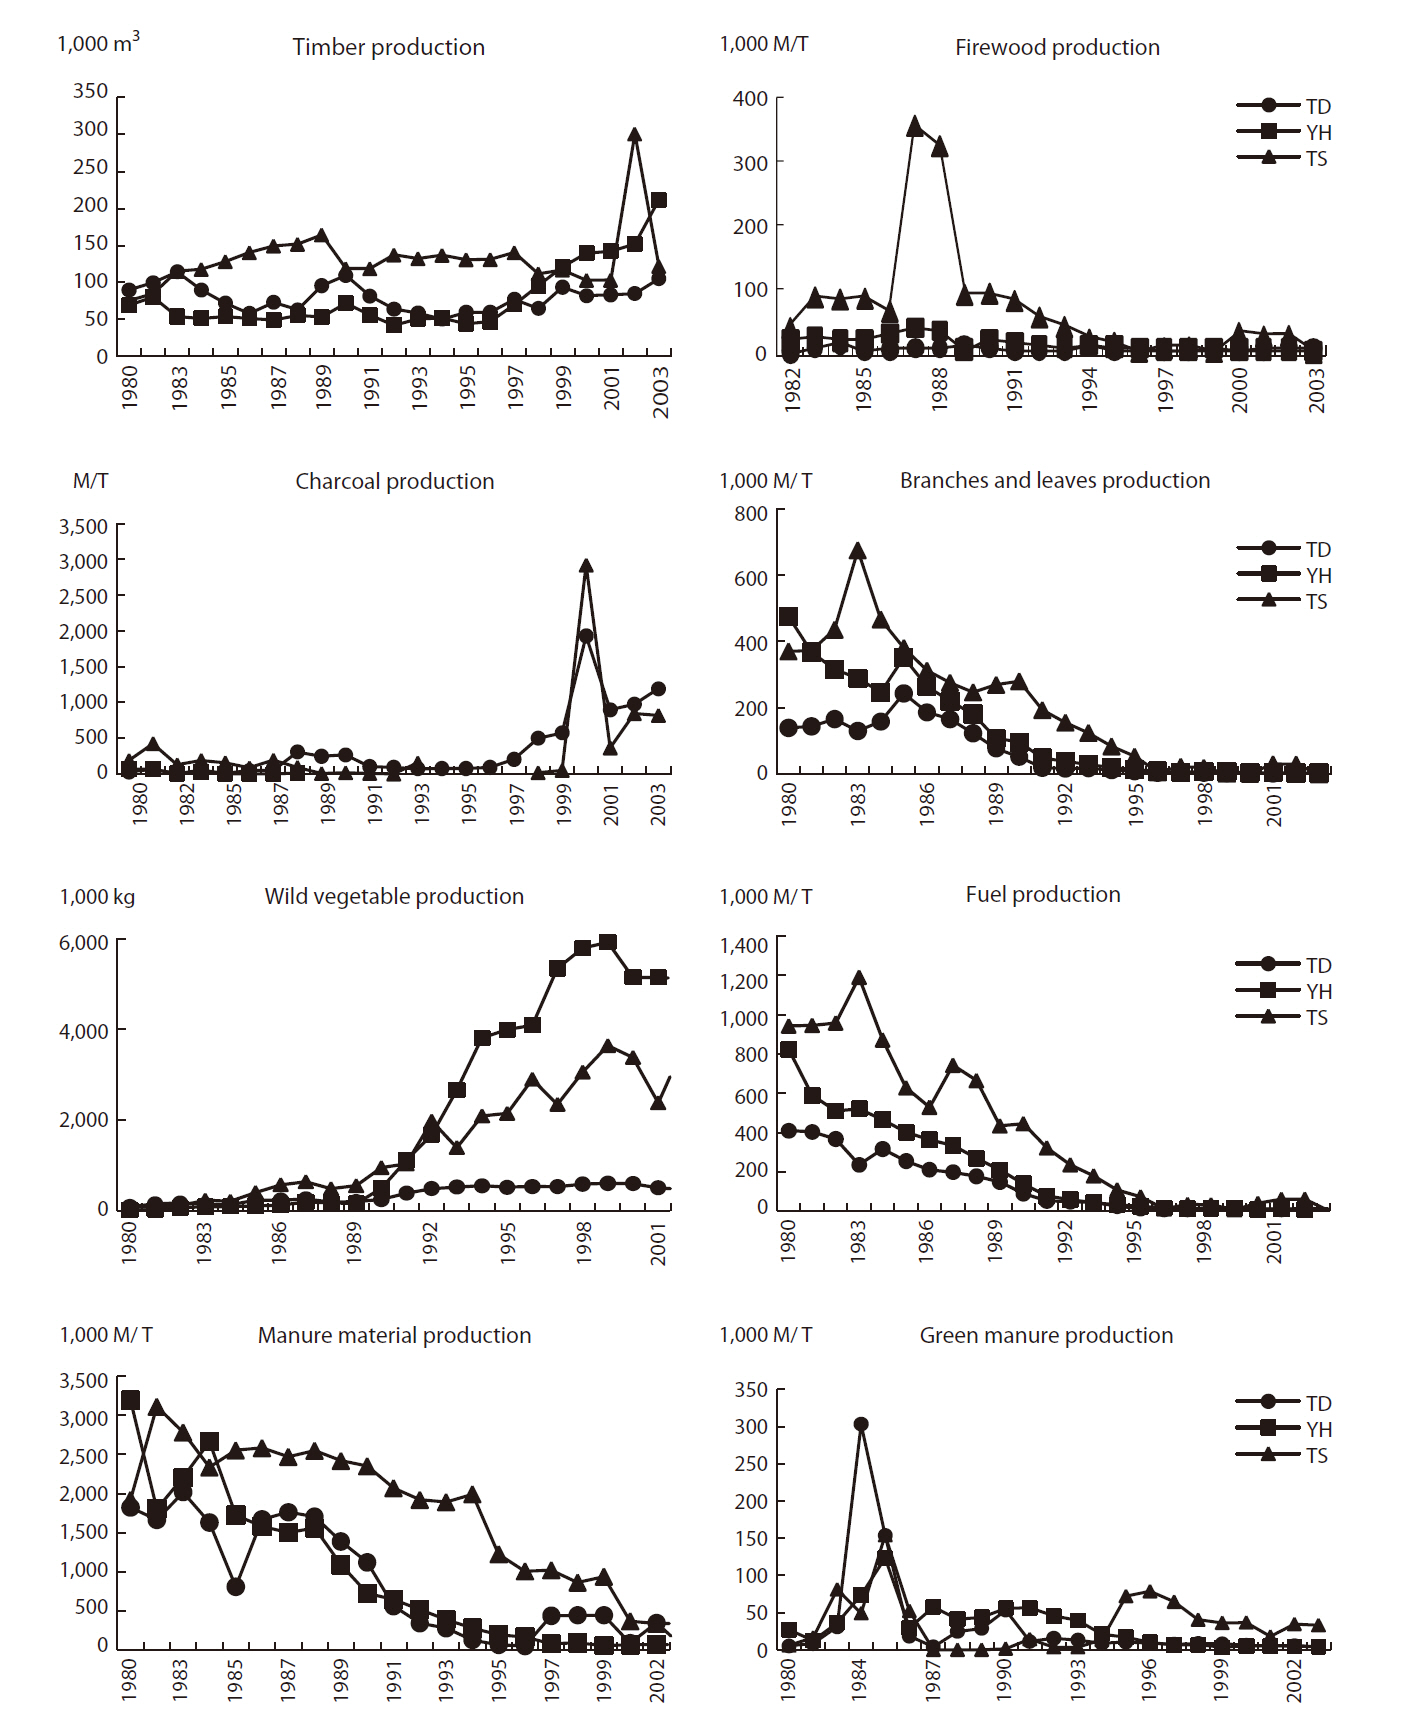 Trend of changing forest production in the three study areas. Source: Korea Statistical Information System (http://kosis.nso.go.kr/). TD Teokdong-ri; Ts Teokseong-ri; YH Yanghwa-ri.